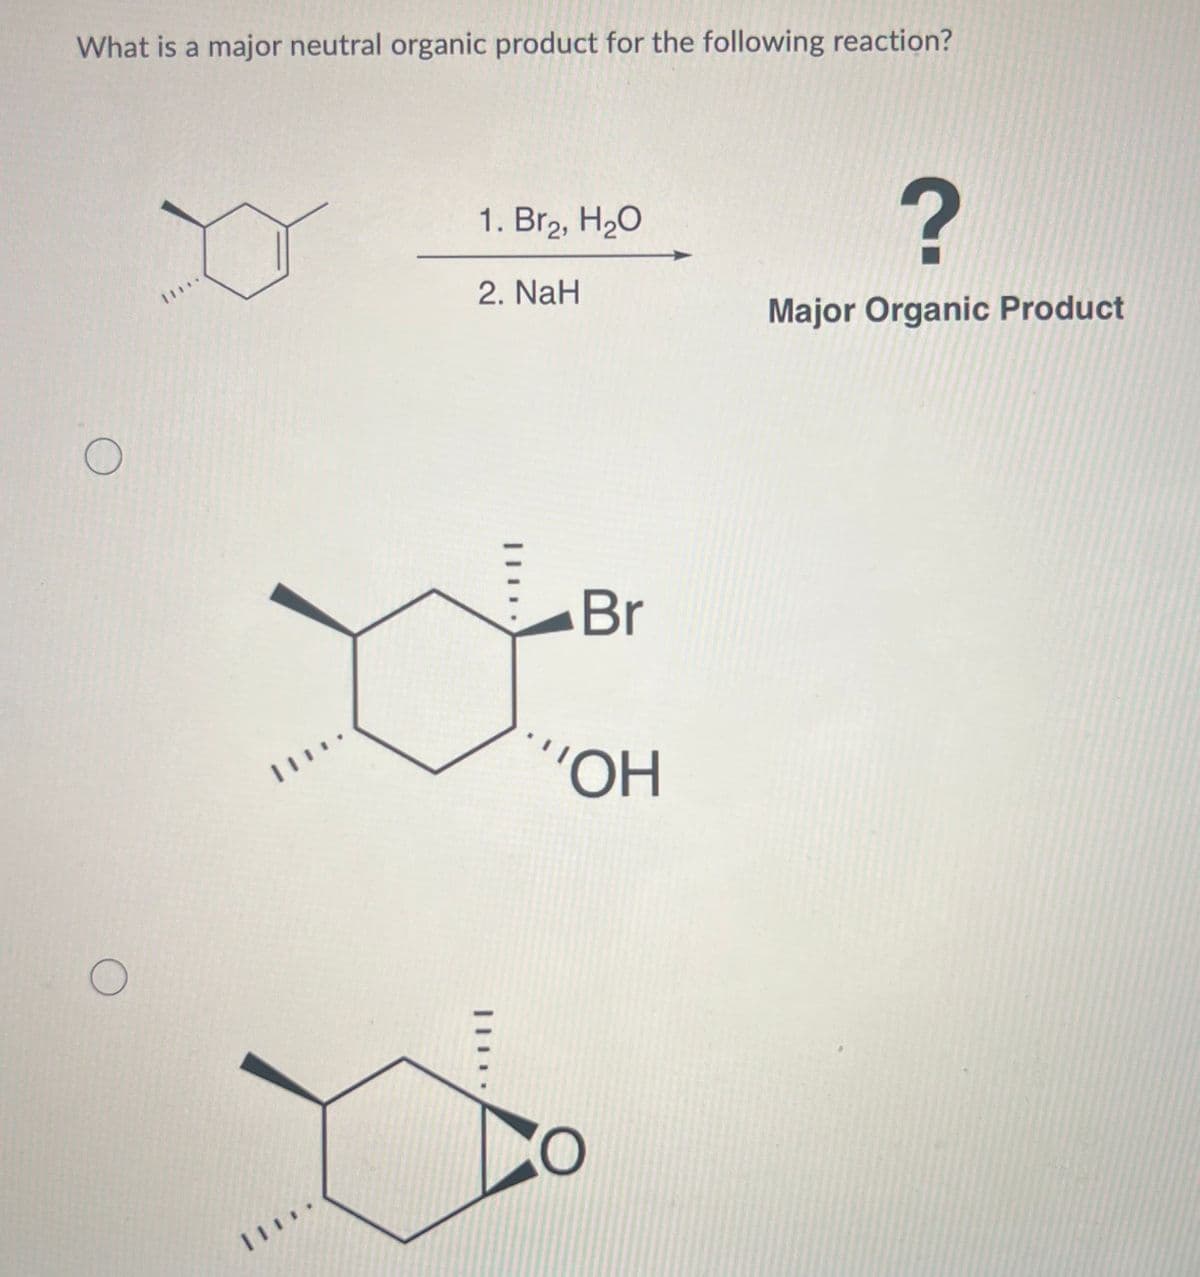 What is a major neutral organic product for the following reaction?
O
O
[***
.....
1. Bra, H2O
2. NaH
.....
Br
''OH
?
Major Organic Product